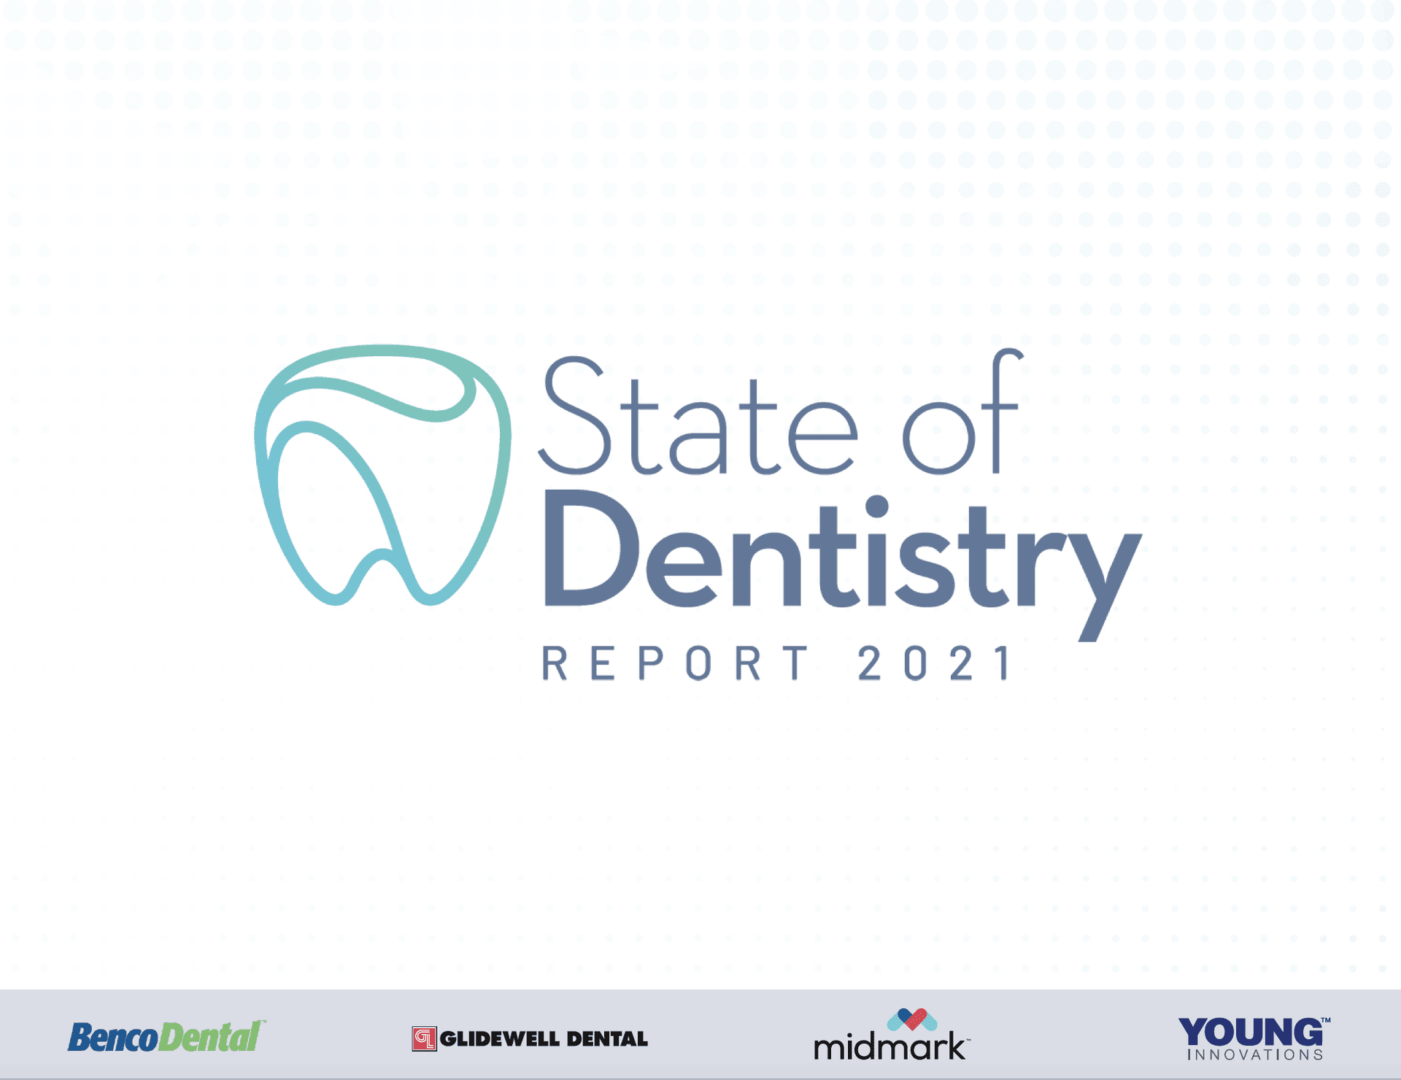 The inaugural State of Dentistry Report, just released, analyzes compelling survey responses from 720 dentists and office managers in North America. Dental professionals respond to questions such as “Which stats does your dental practice track?” in the State of Dentistry survey fielded by Benco Dental, Glidewell, Midmark Corporation and Young Innovations. Get the complete, by-the-numbers update, available for download at: https://www.benco.com/benco-dental-u/white-paper/state-of-dentistry-report/